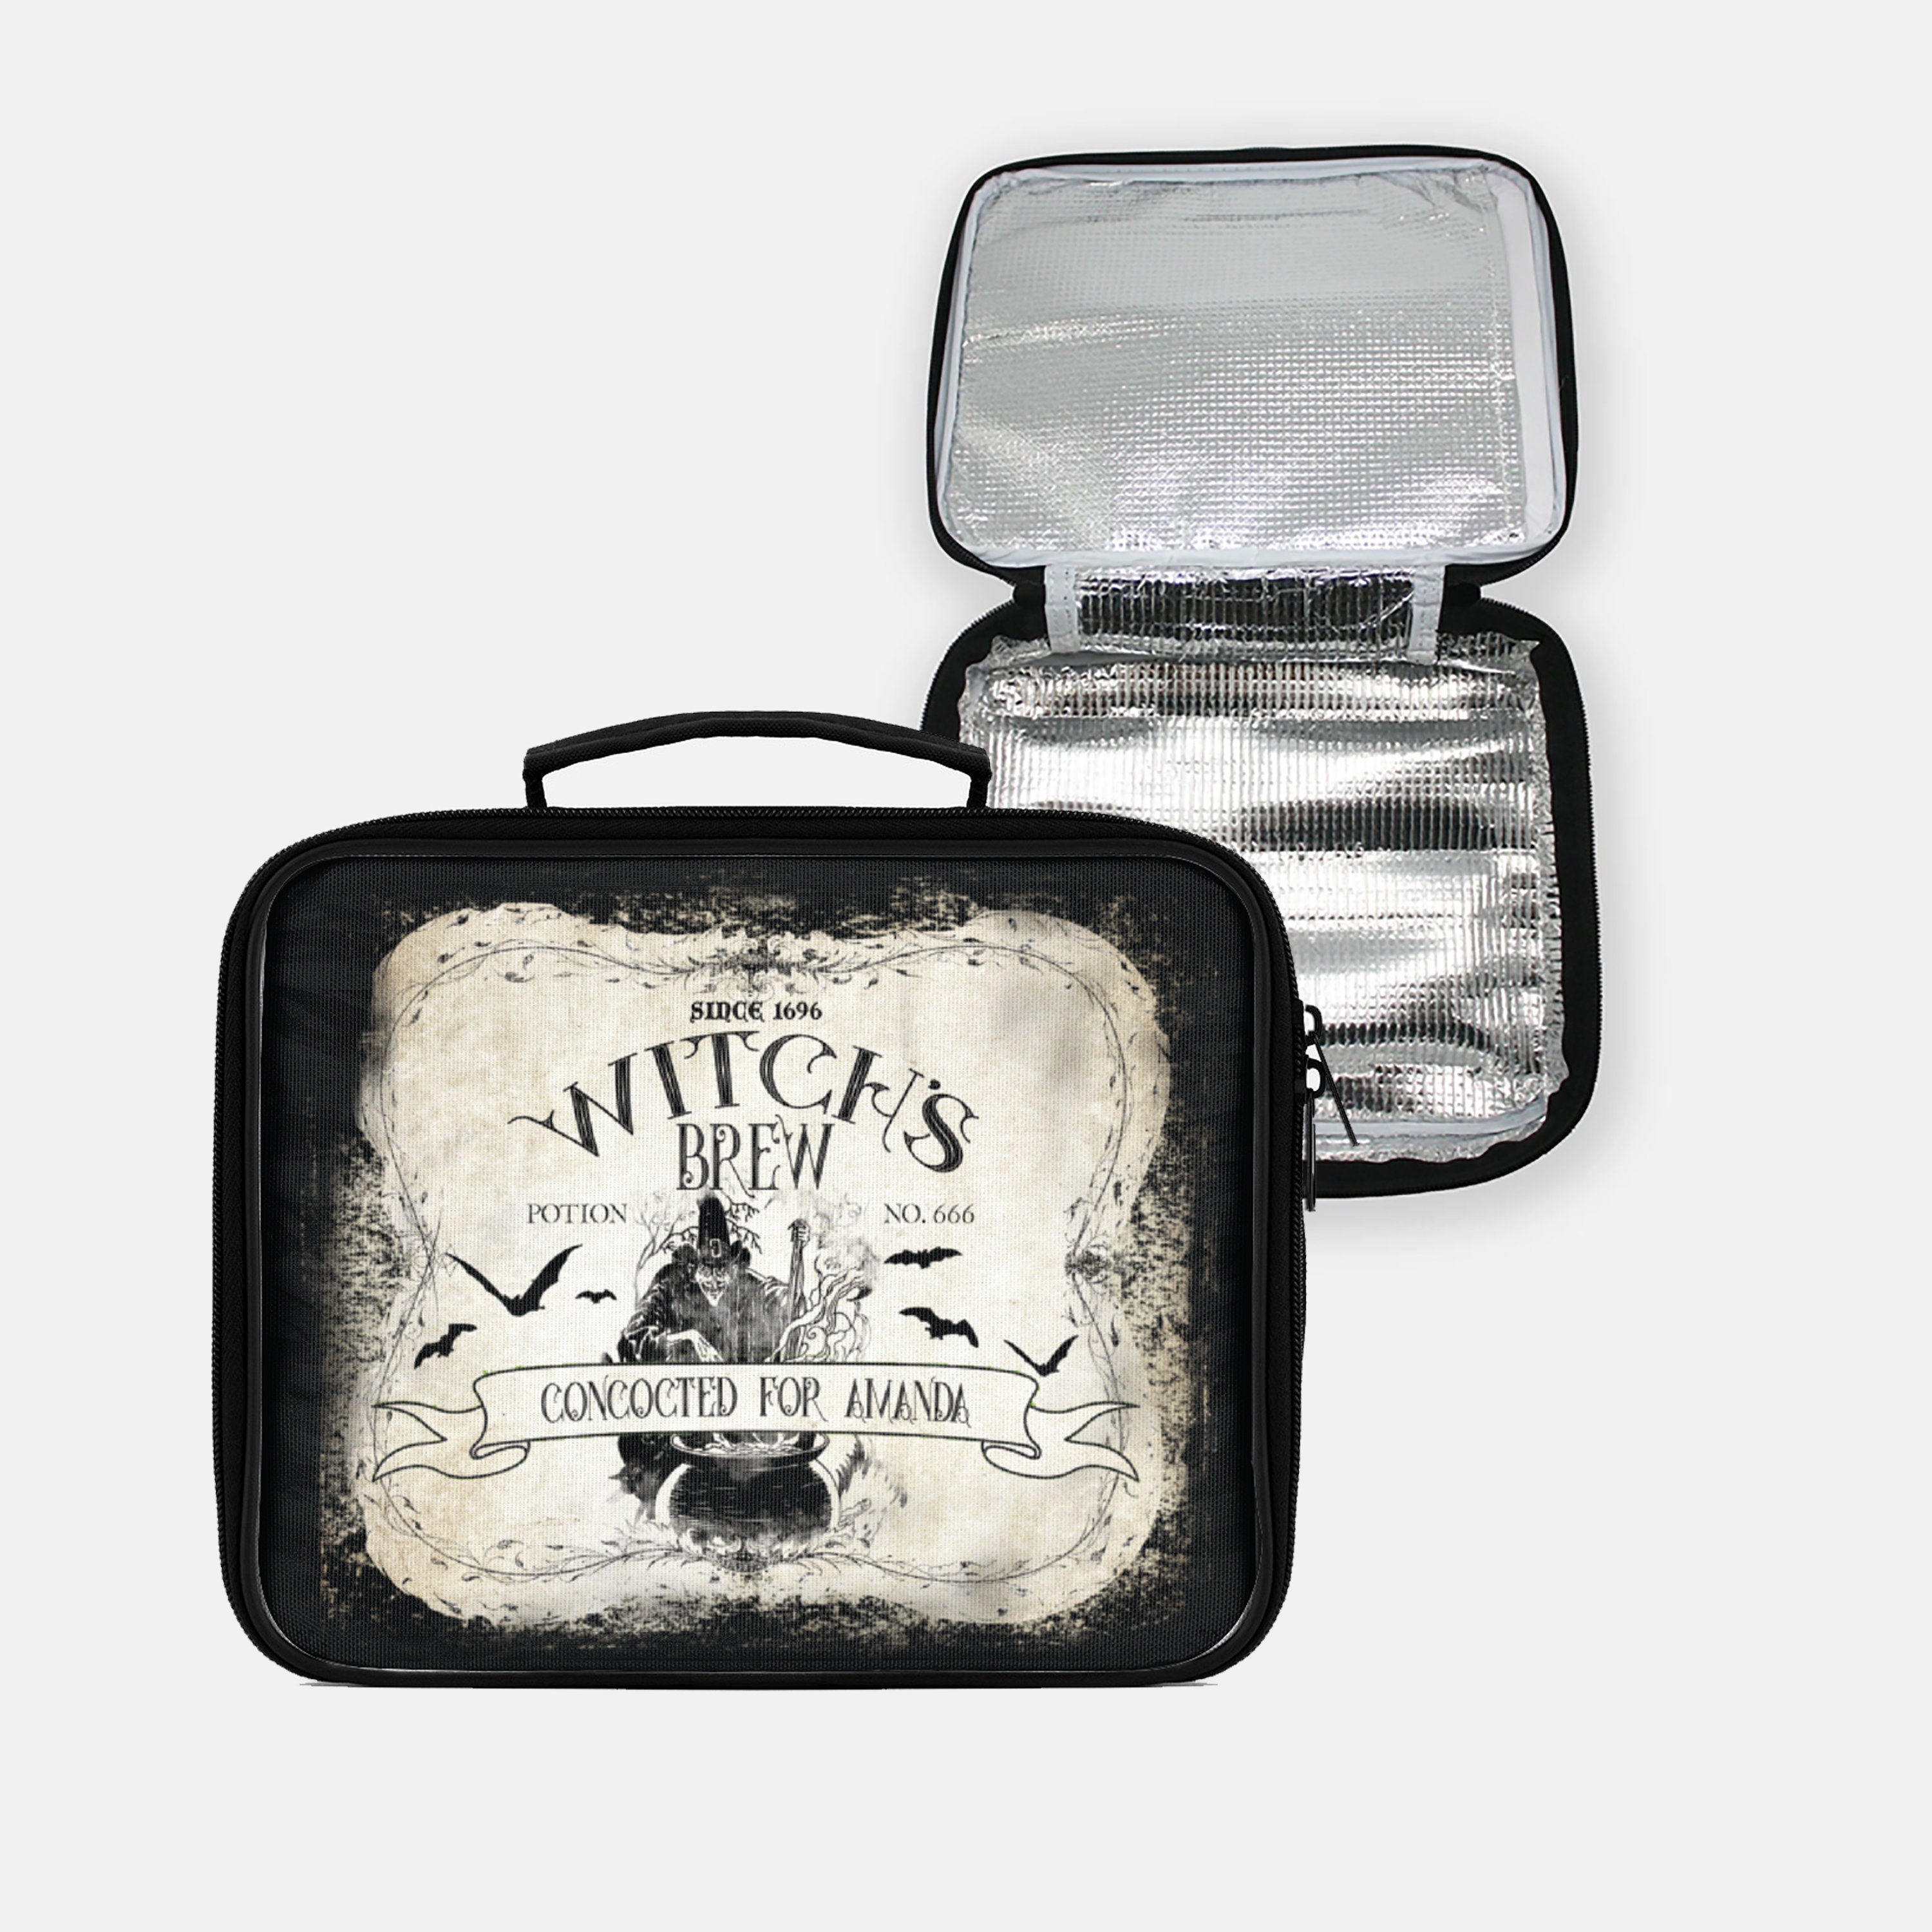 Charcoal Preppy Rings Classic Lunch Box For Teens